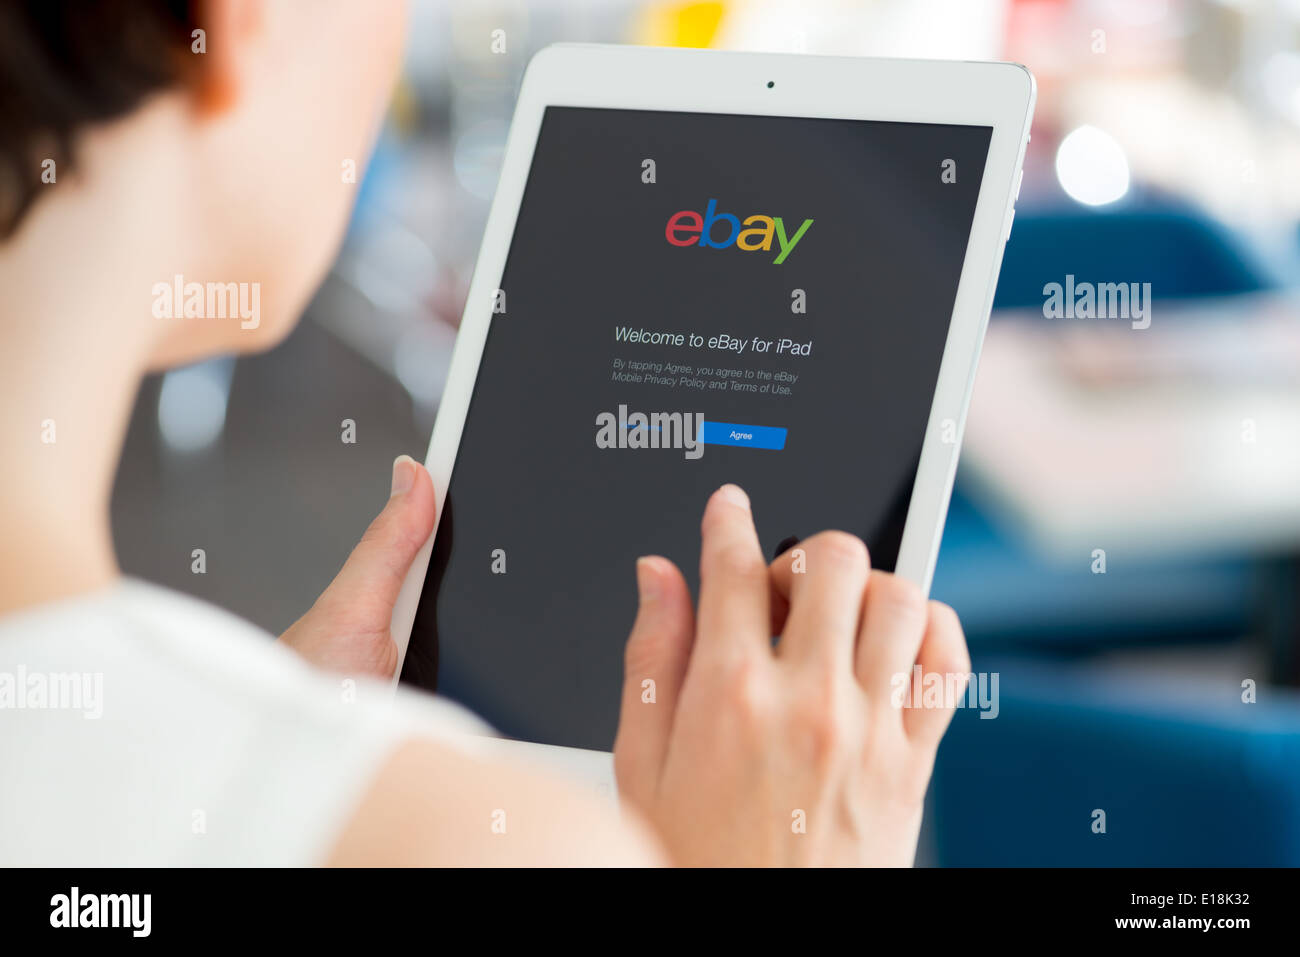 Woman holding a white Apple iPad Air with eBay welcome message on a screen Stock Photo